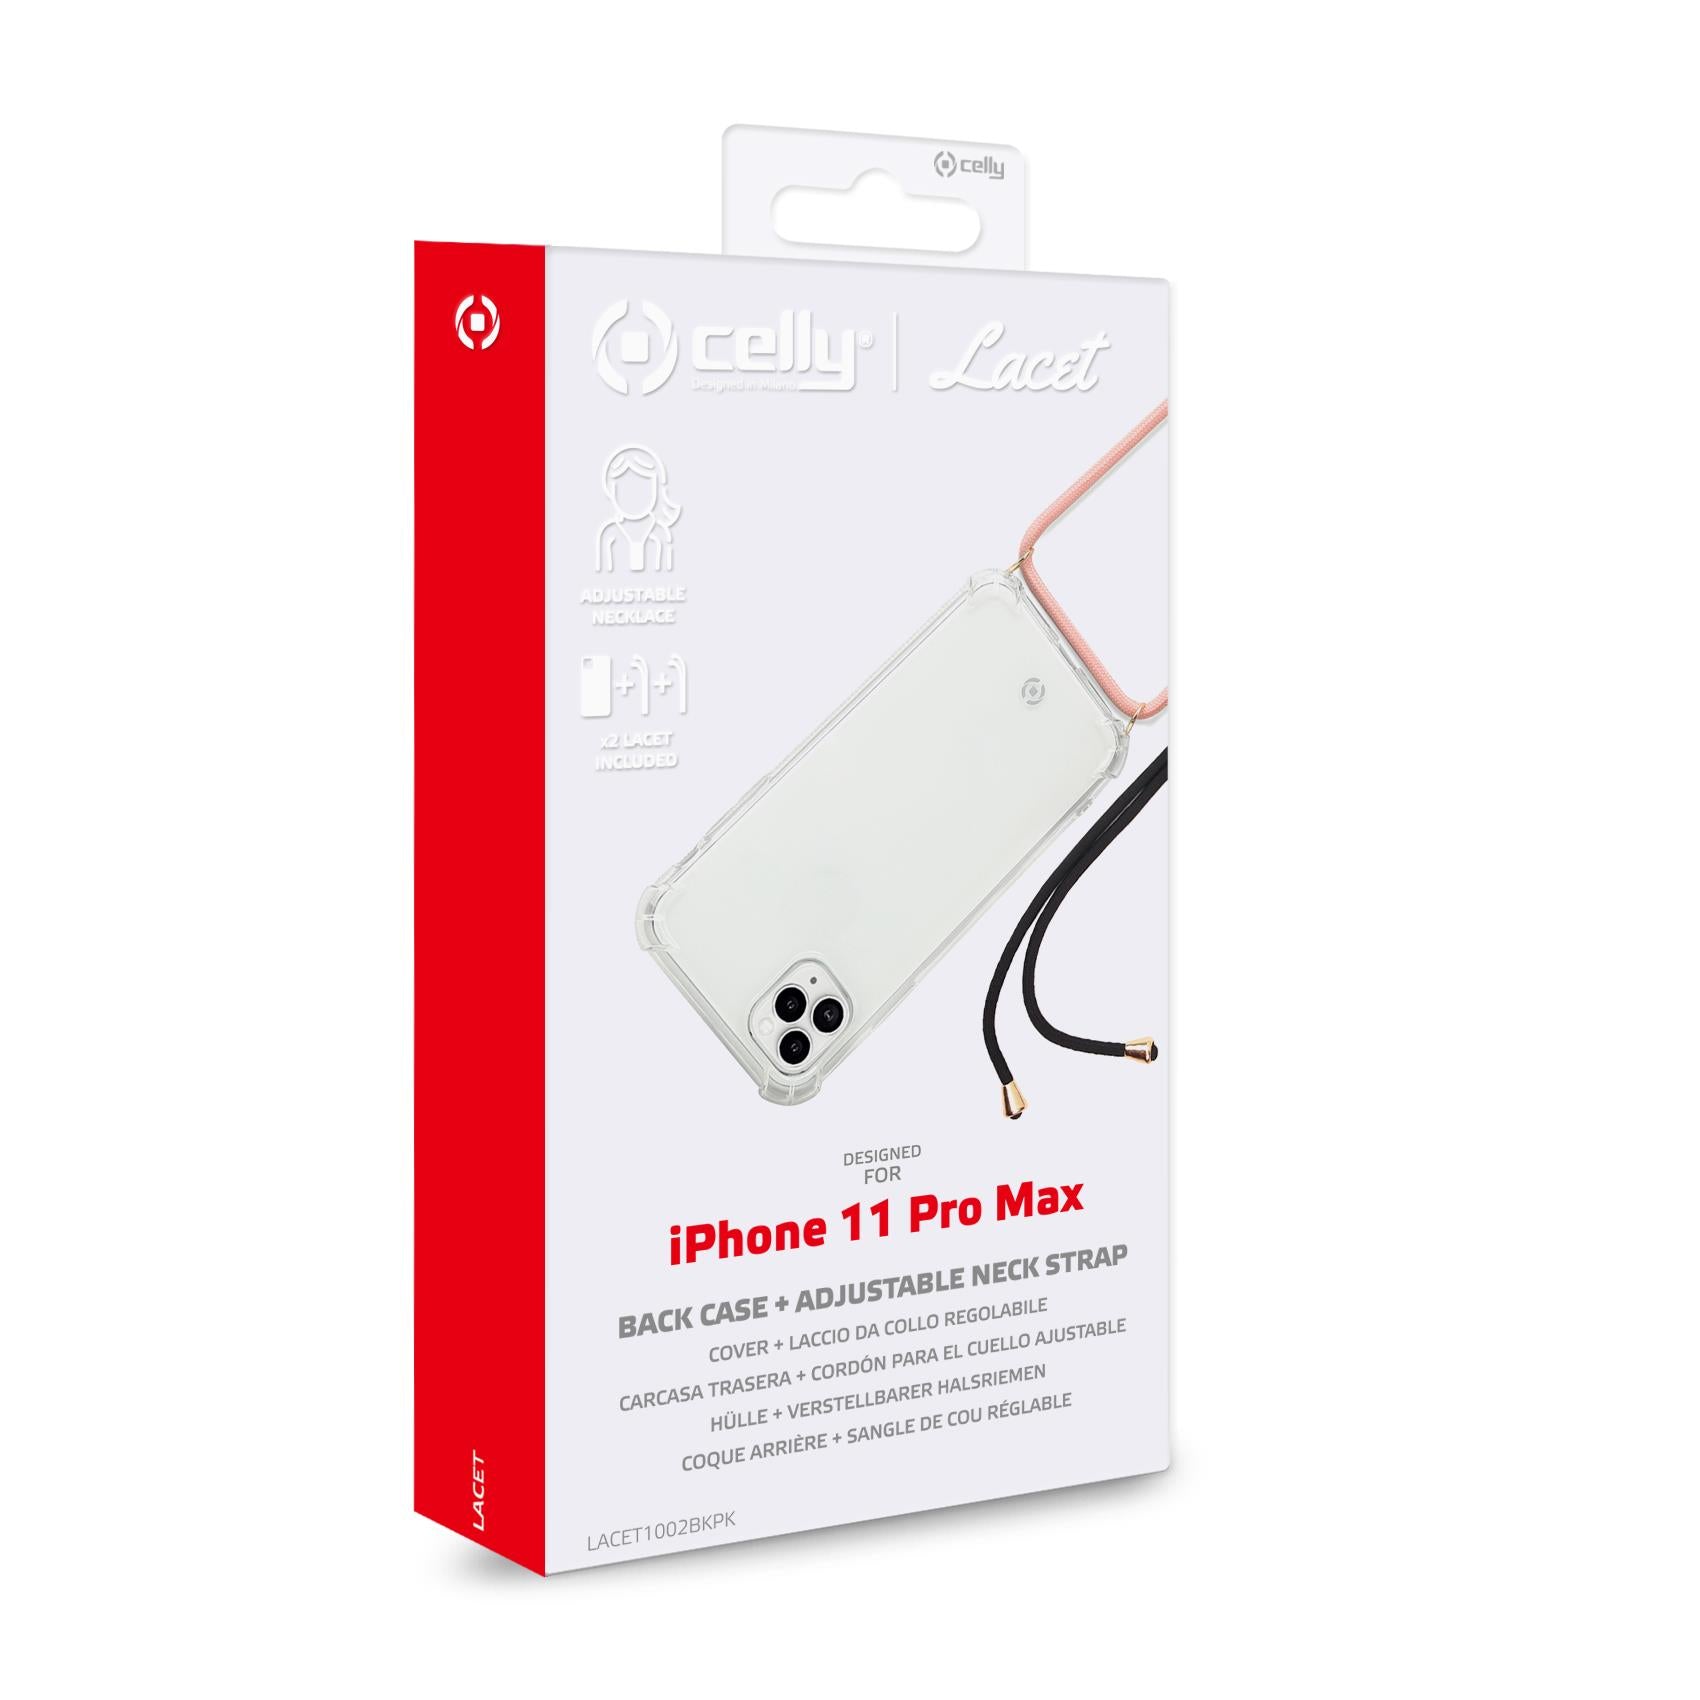 Celly LACET - Apple iPhone 11 Pro Max